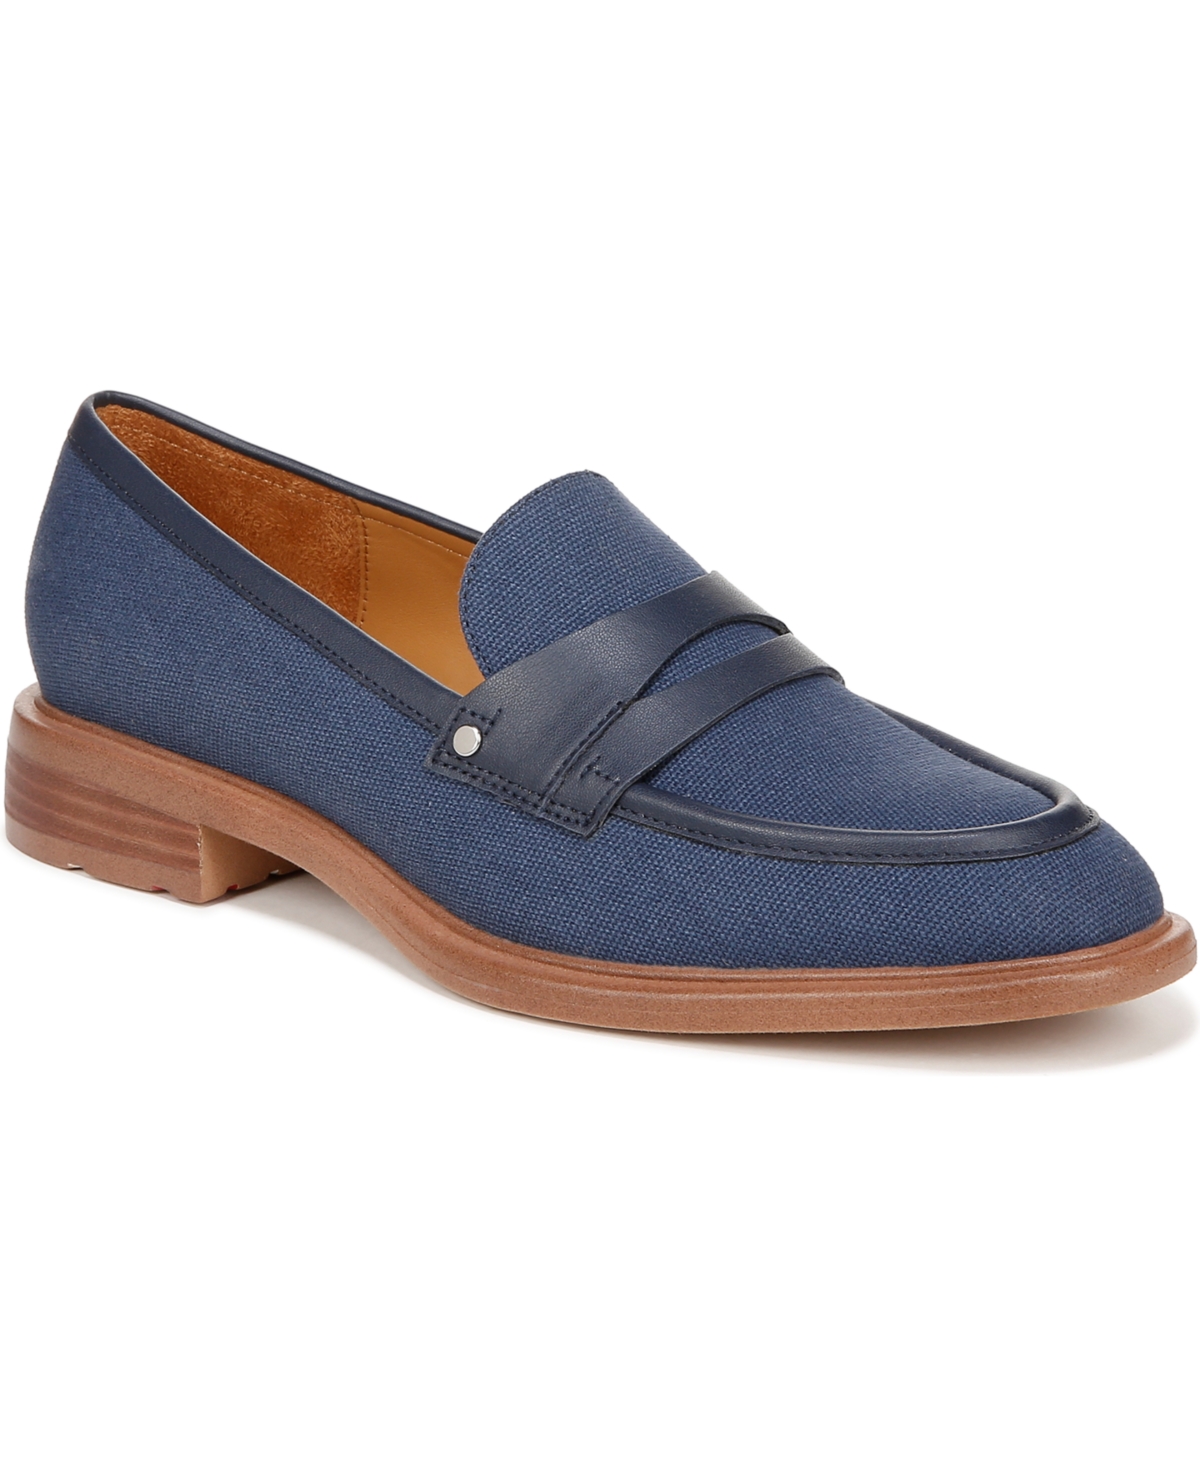 Franco Sarto Edith 2 Loafers In Navy Blue Fabric